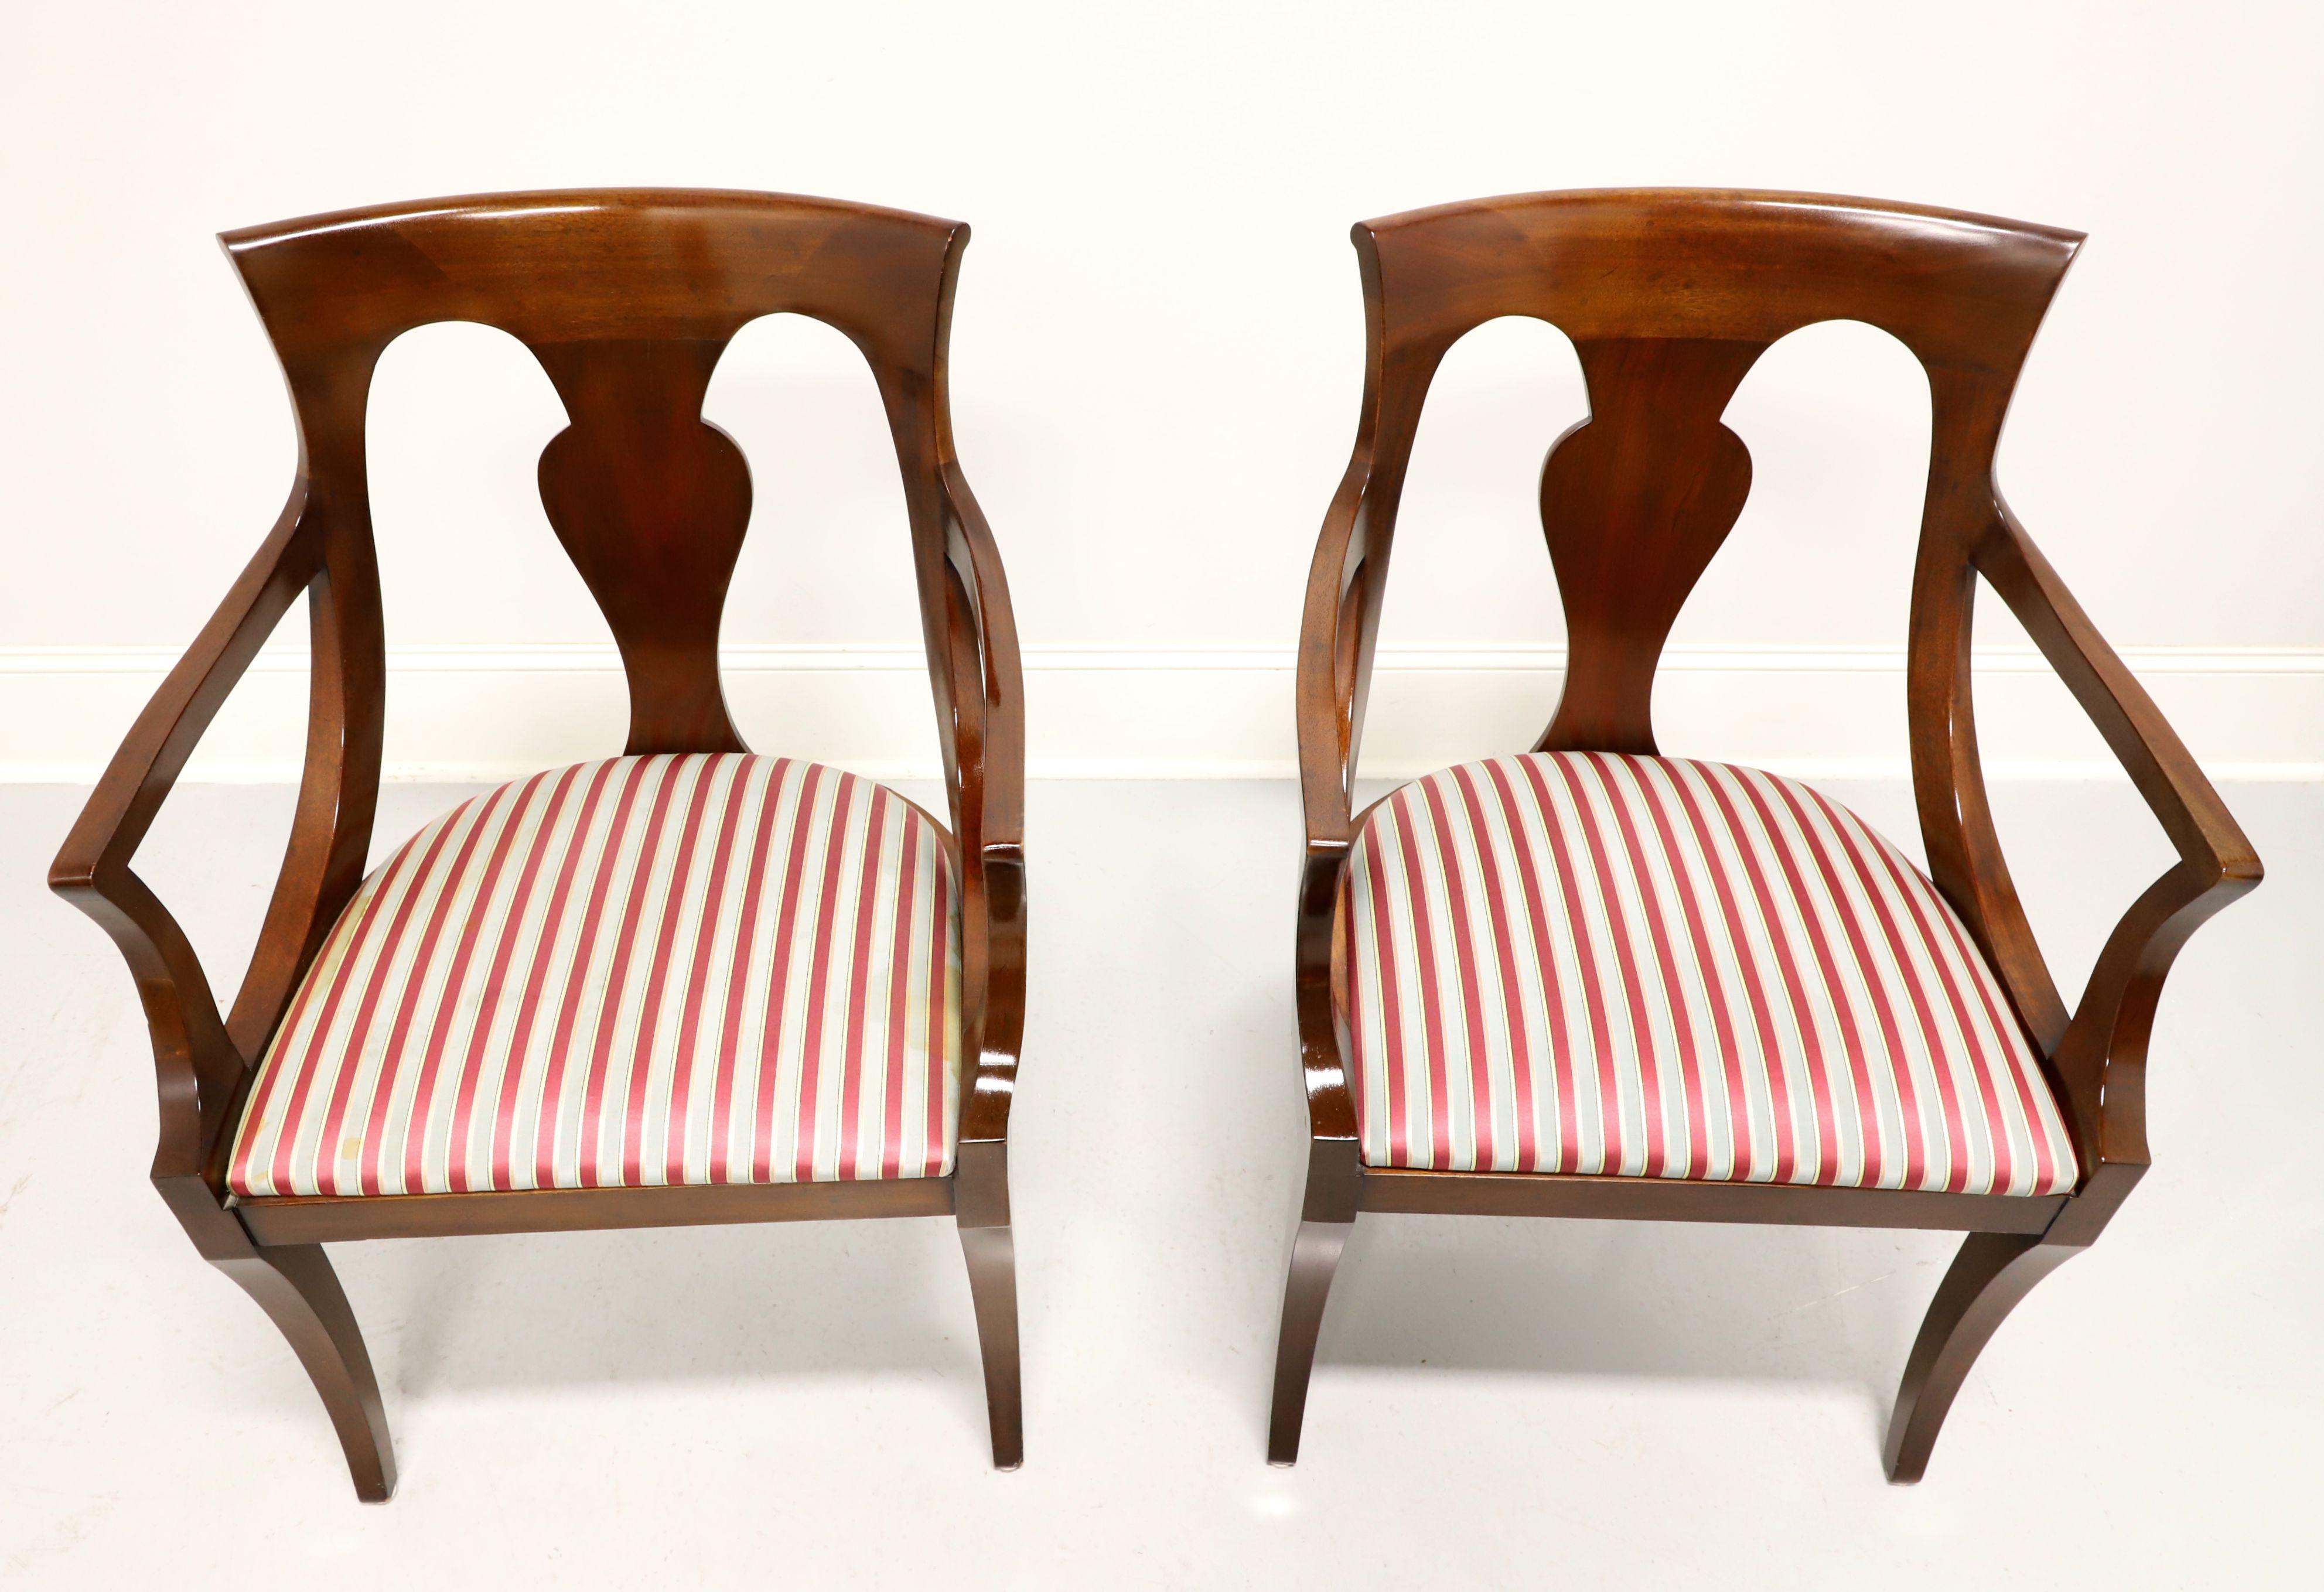 A pair of dining armchairs in the Empire style by Drexel Heritage. Solid mahogany with carved barback crest rail, carved backrest, curved arms, upholstered seat in a red & silver colored stripe fabric and saber legs. Made in Morganton, North